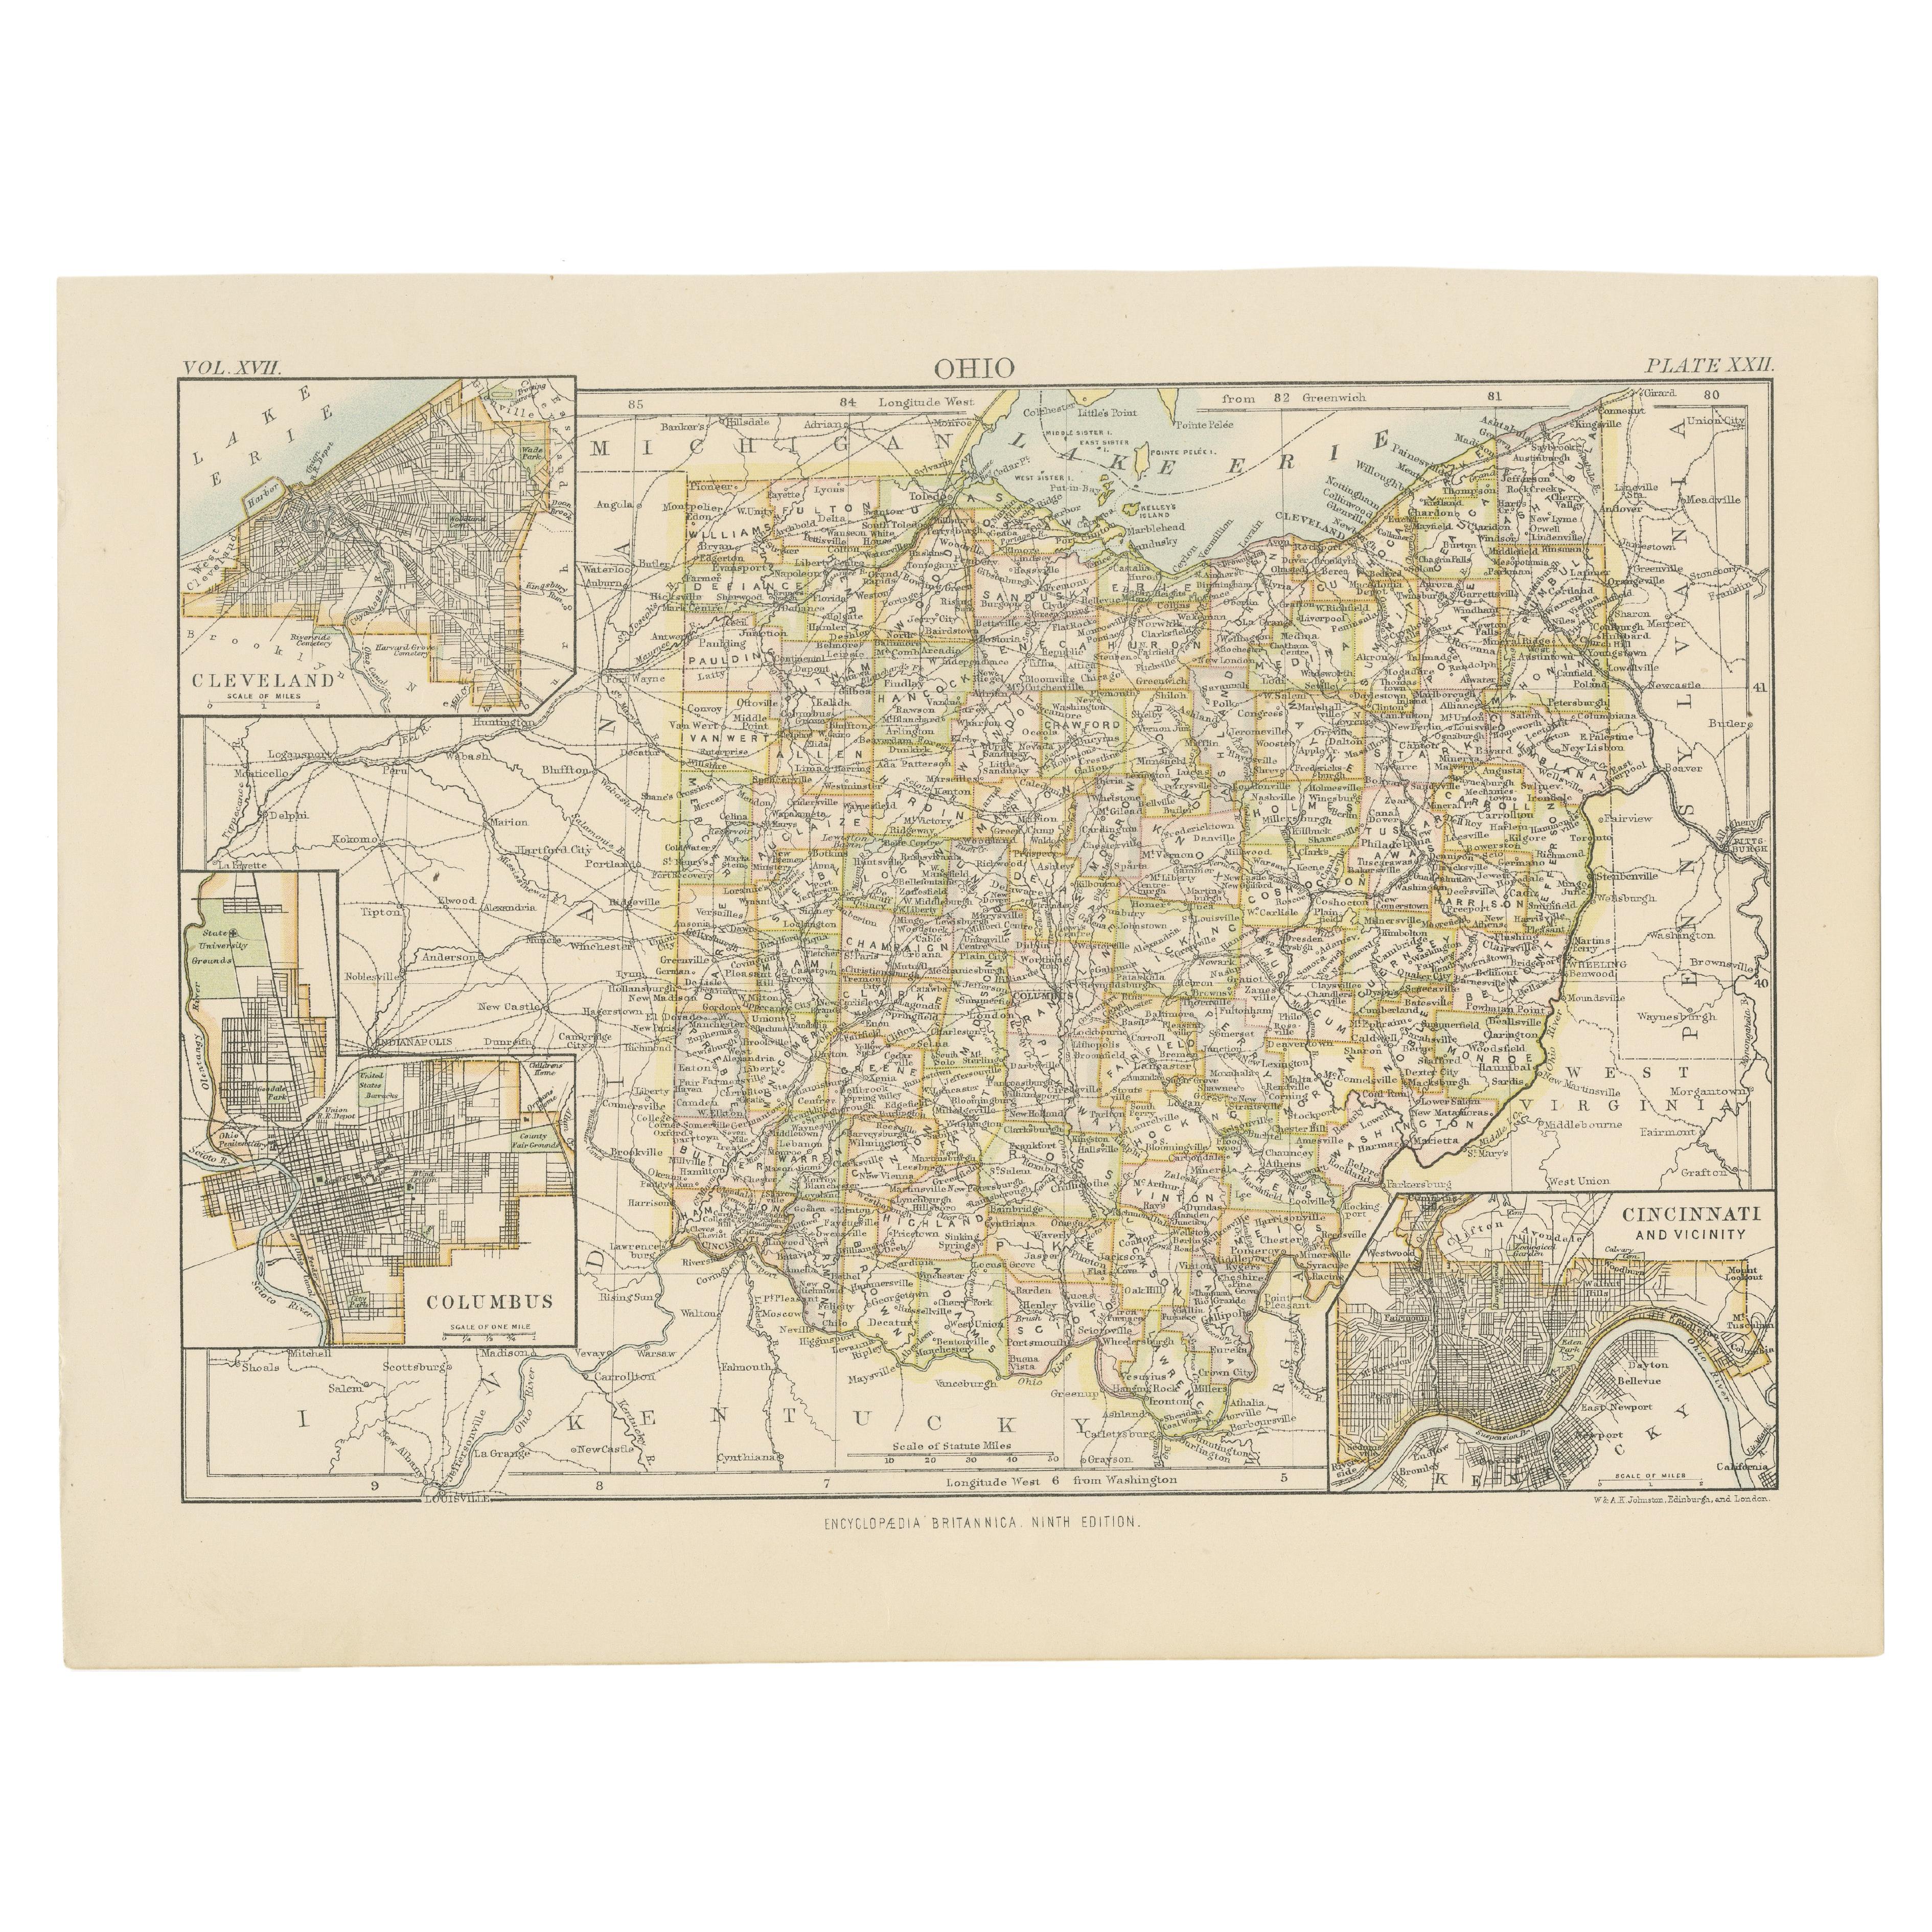 Antique Map of Ohio, with Inset Maps of Cleveland, Columbus and Cincinnati For Sale